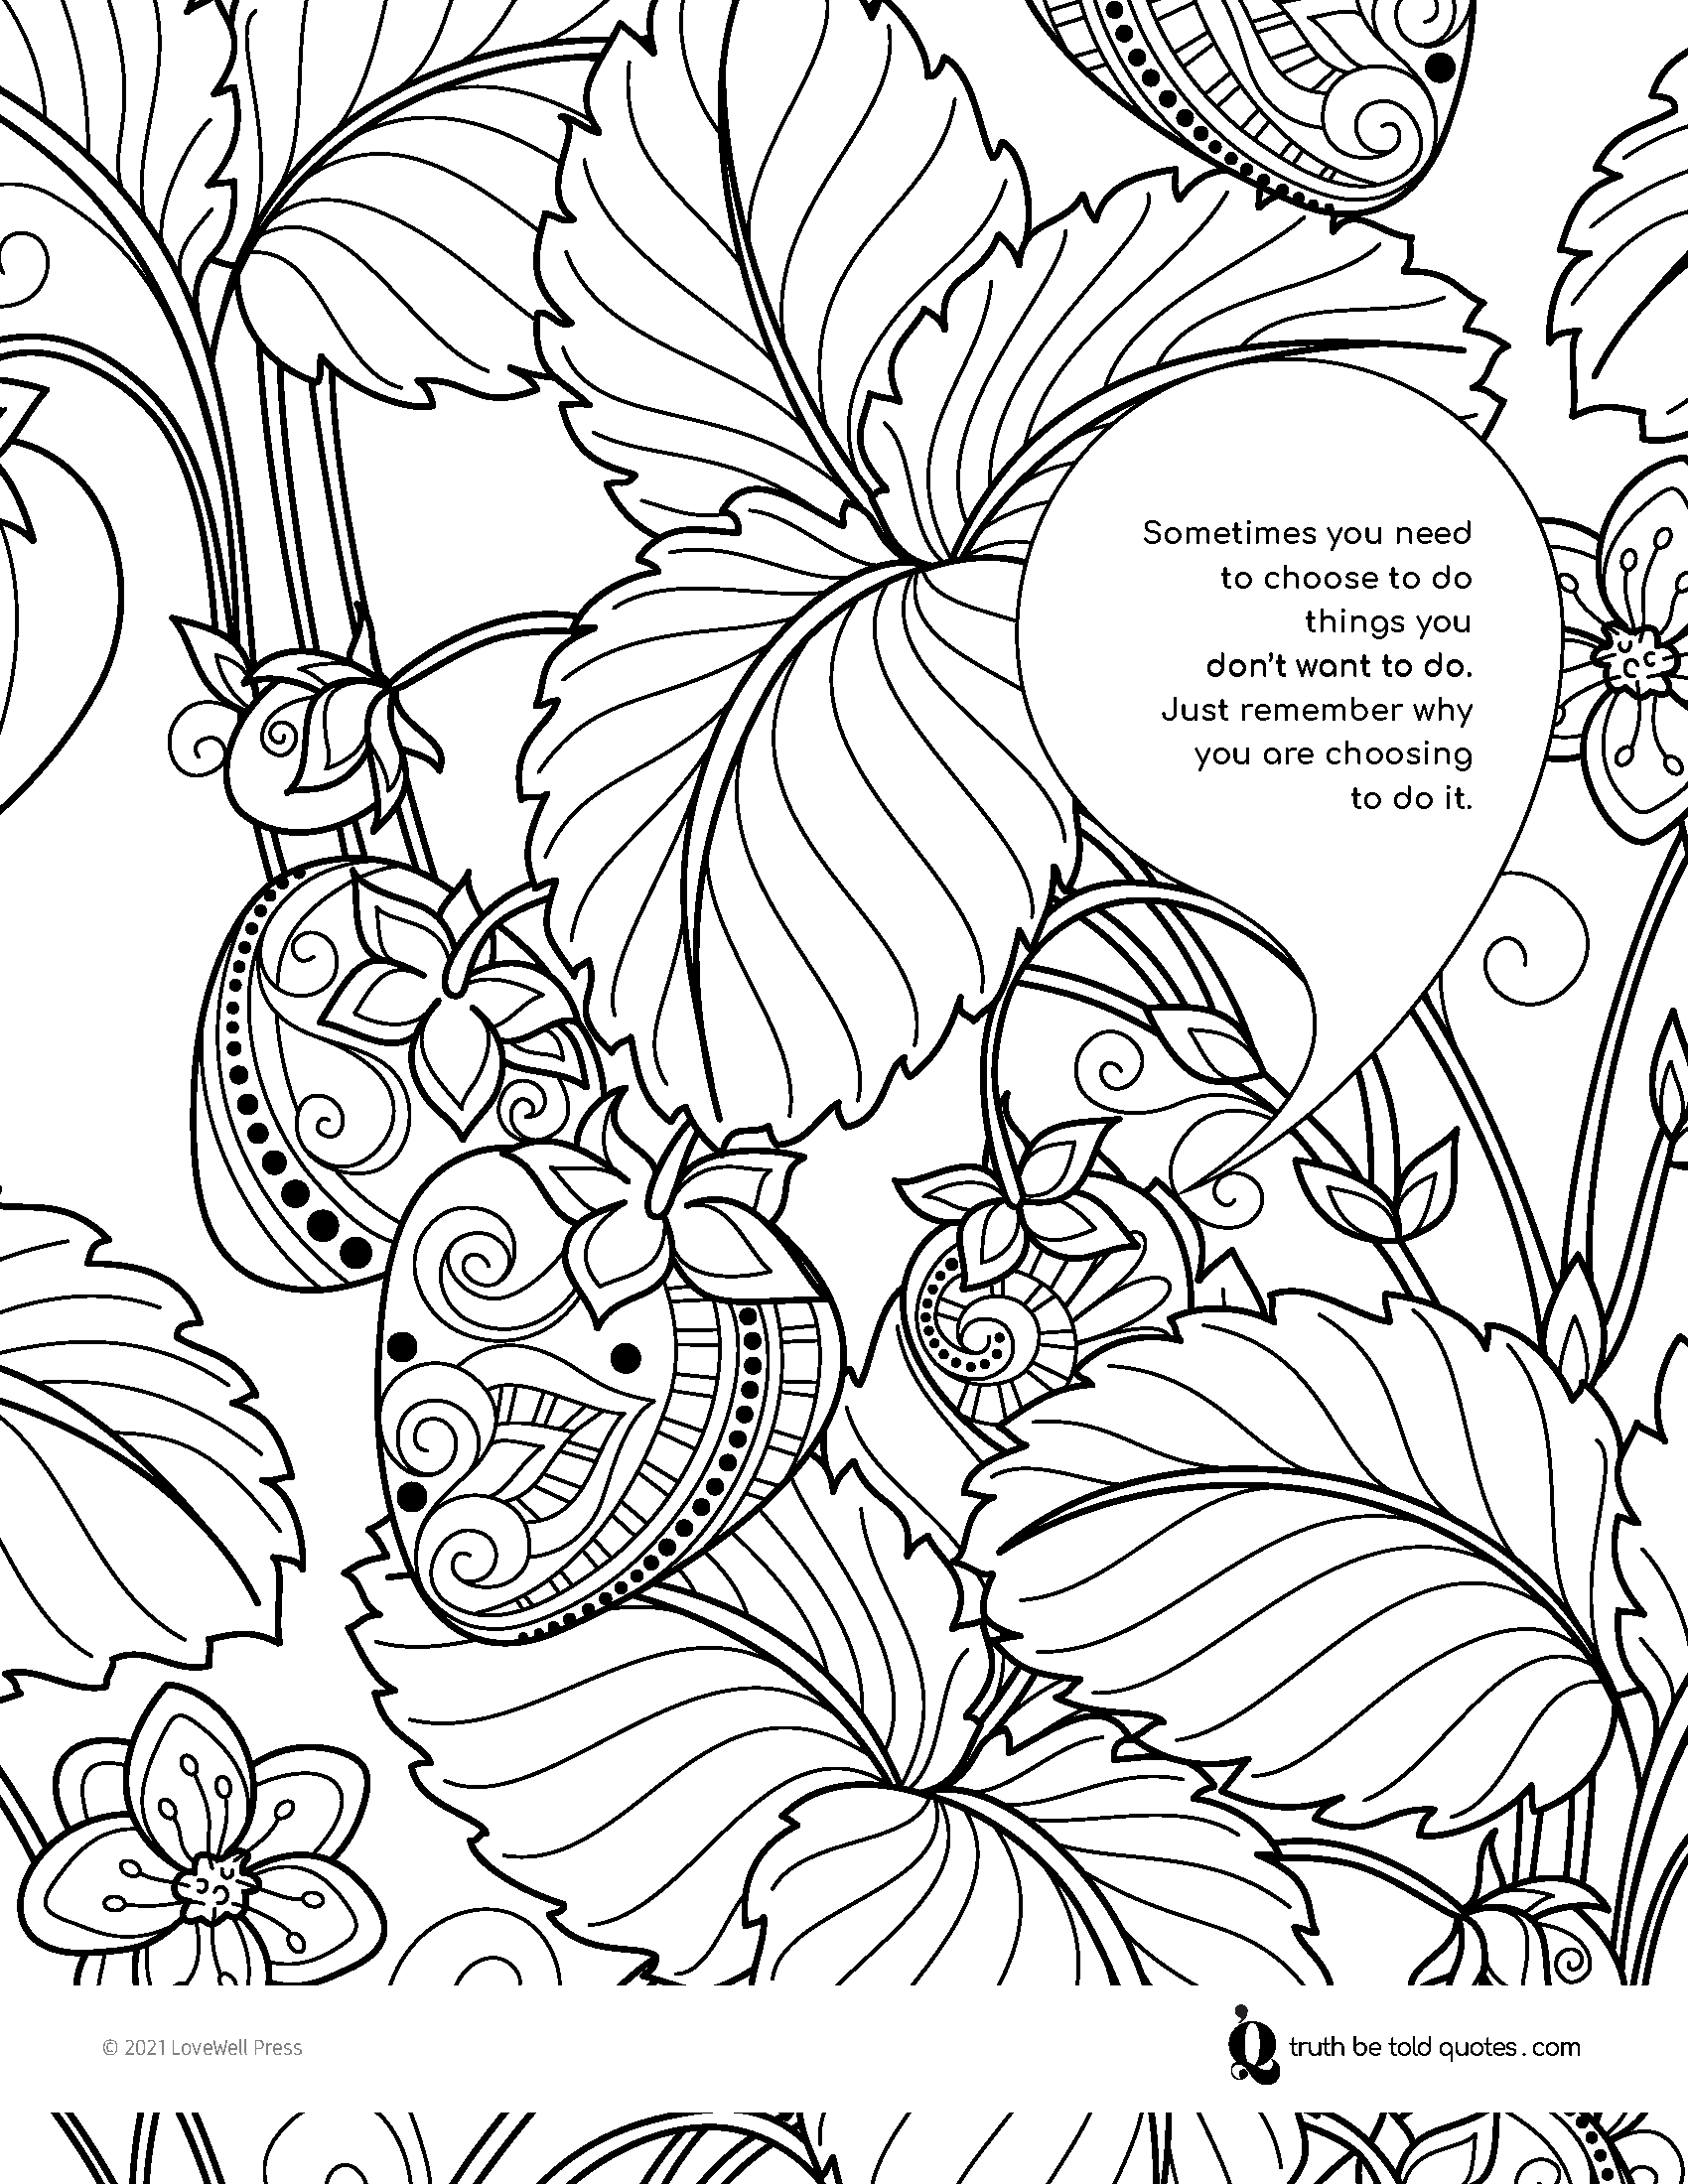 Coloring page with quote about making empowered choices with image of strawberries